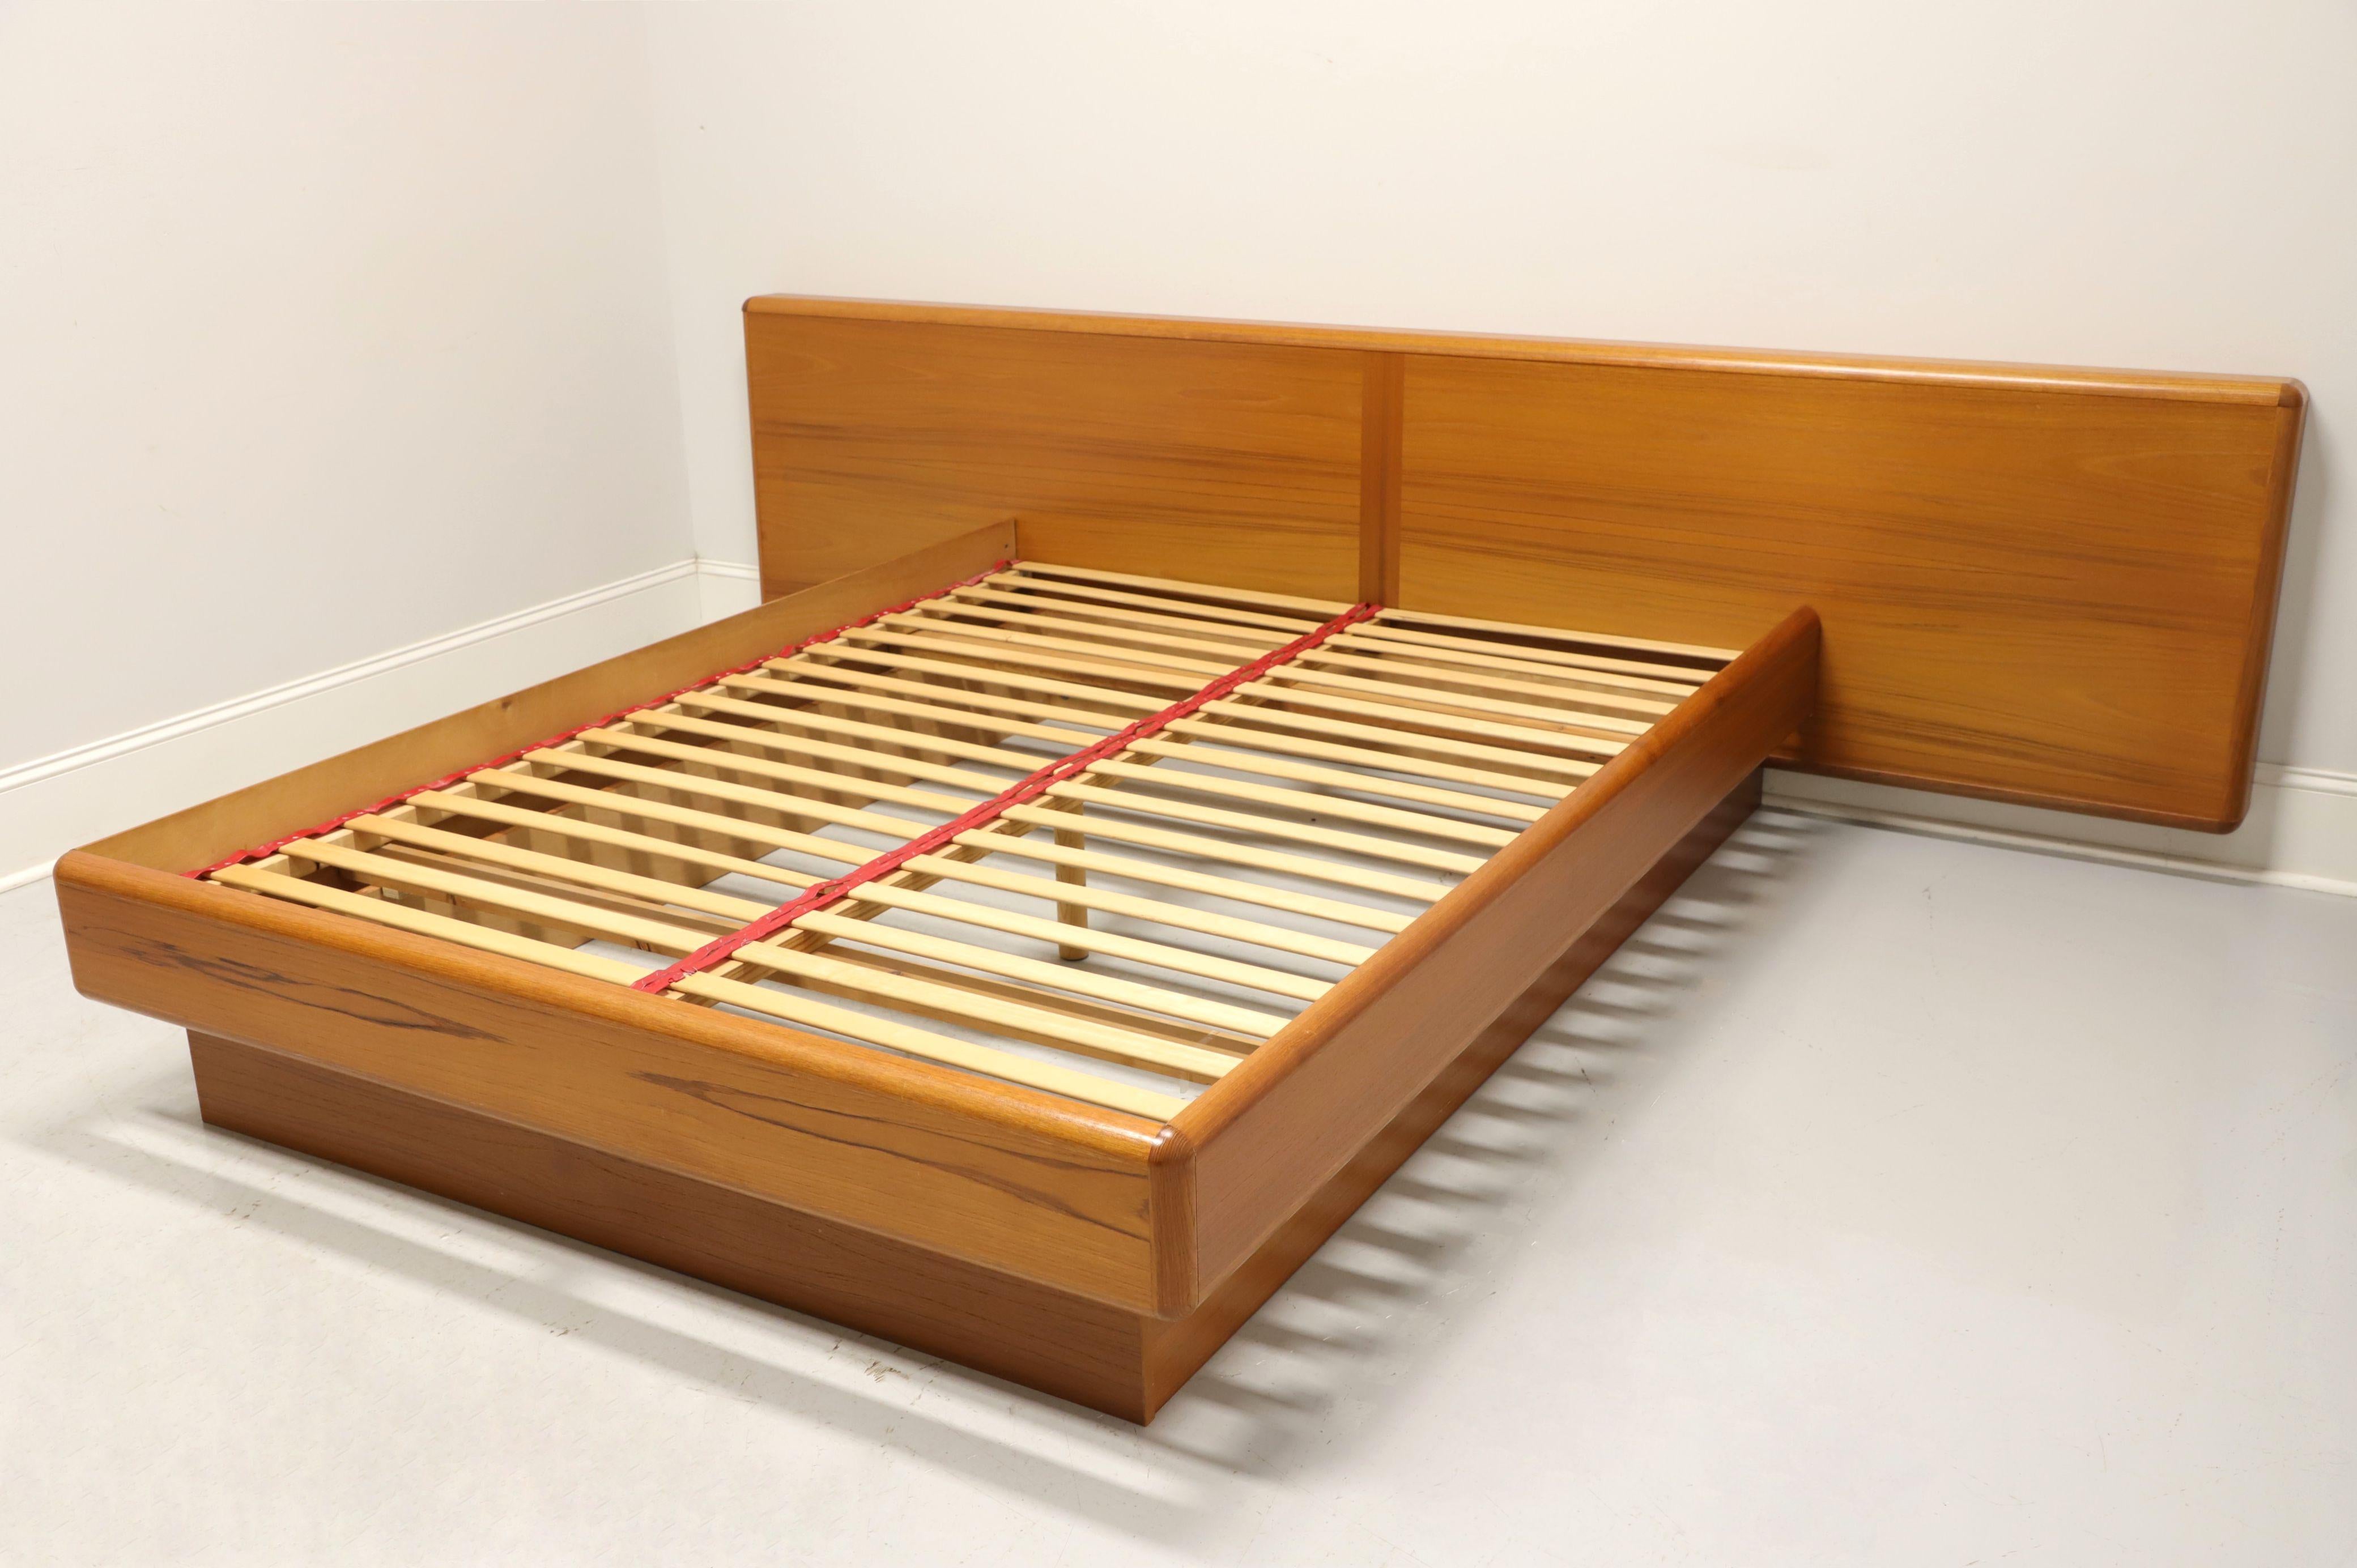 A Danish Mid-Century Modern queen size platform bed by Jesper International. Teak and wood composite with a headboard that extends beyond the attached elevated platform and appears to float. Platform joins together with pin & lock joints and braces